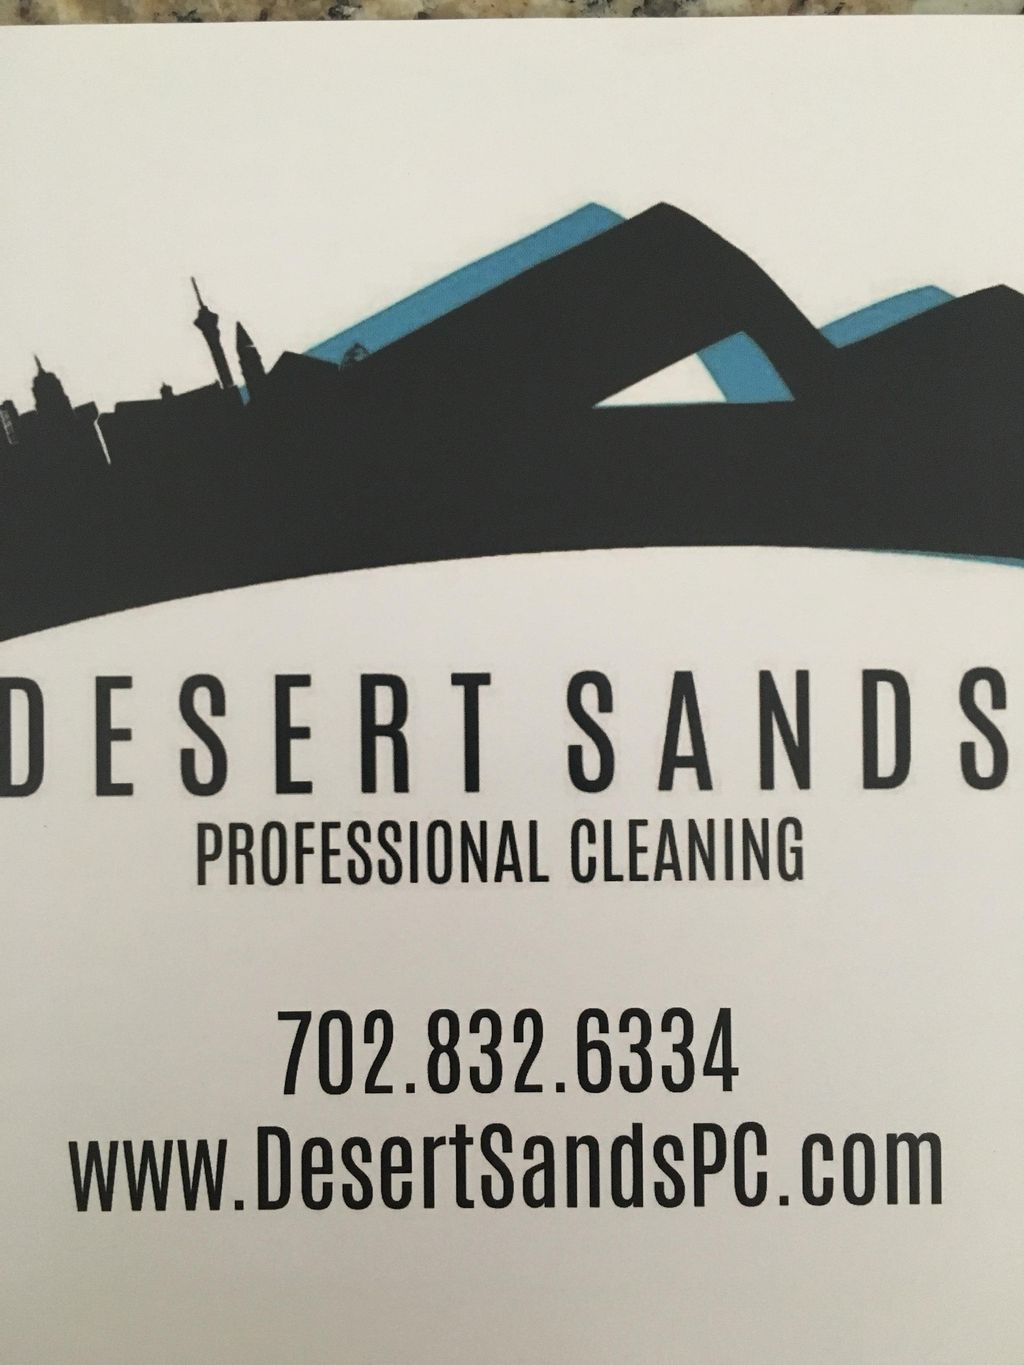 Desert Sands Professional Cleaning